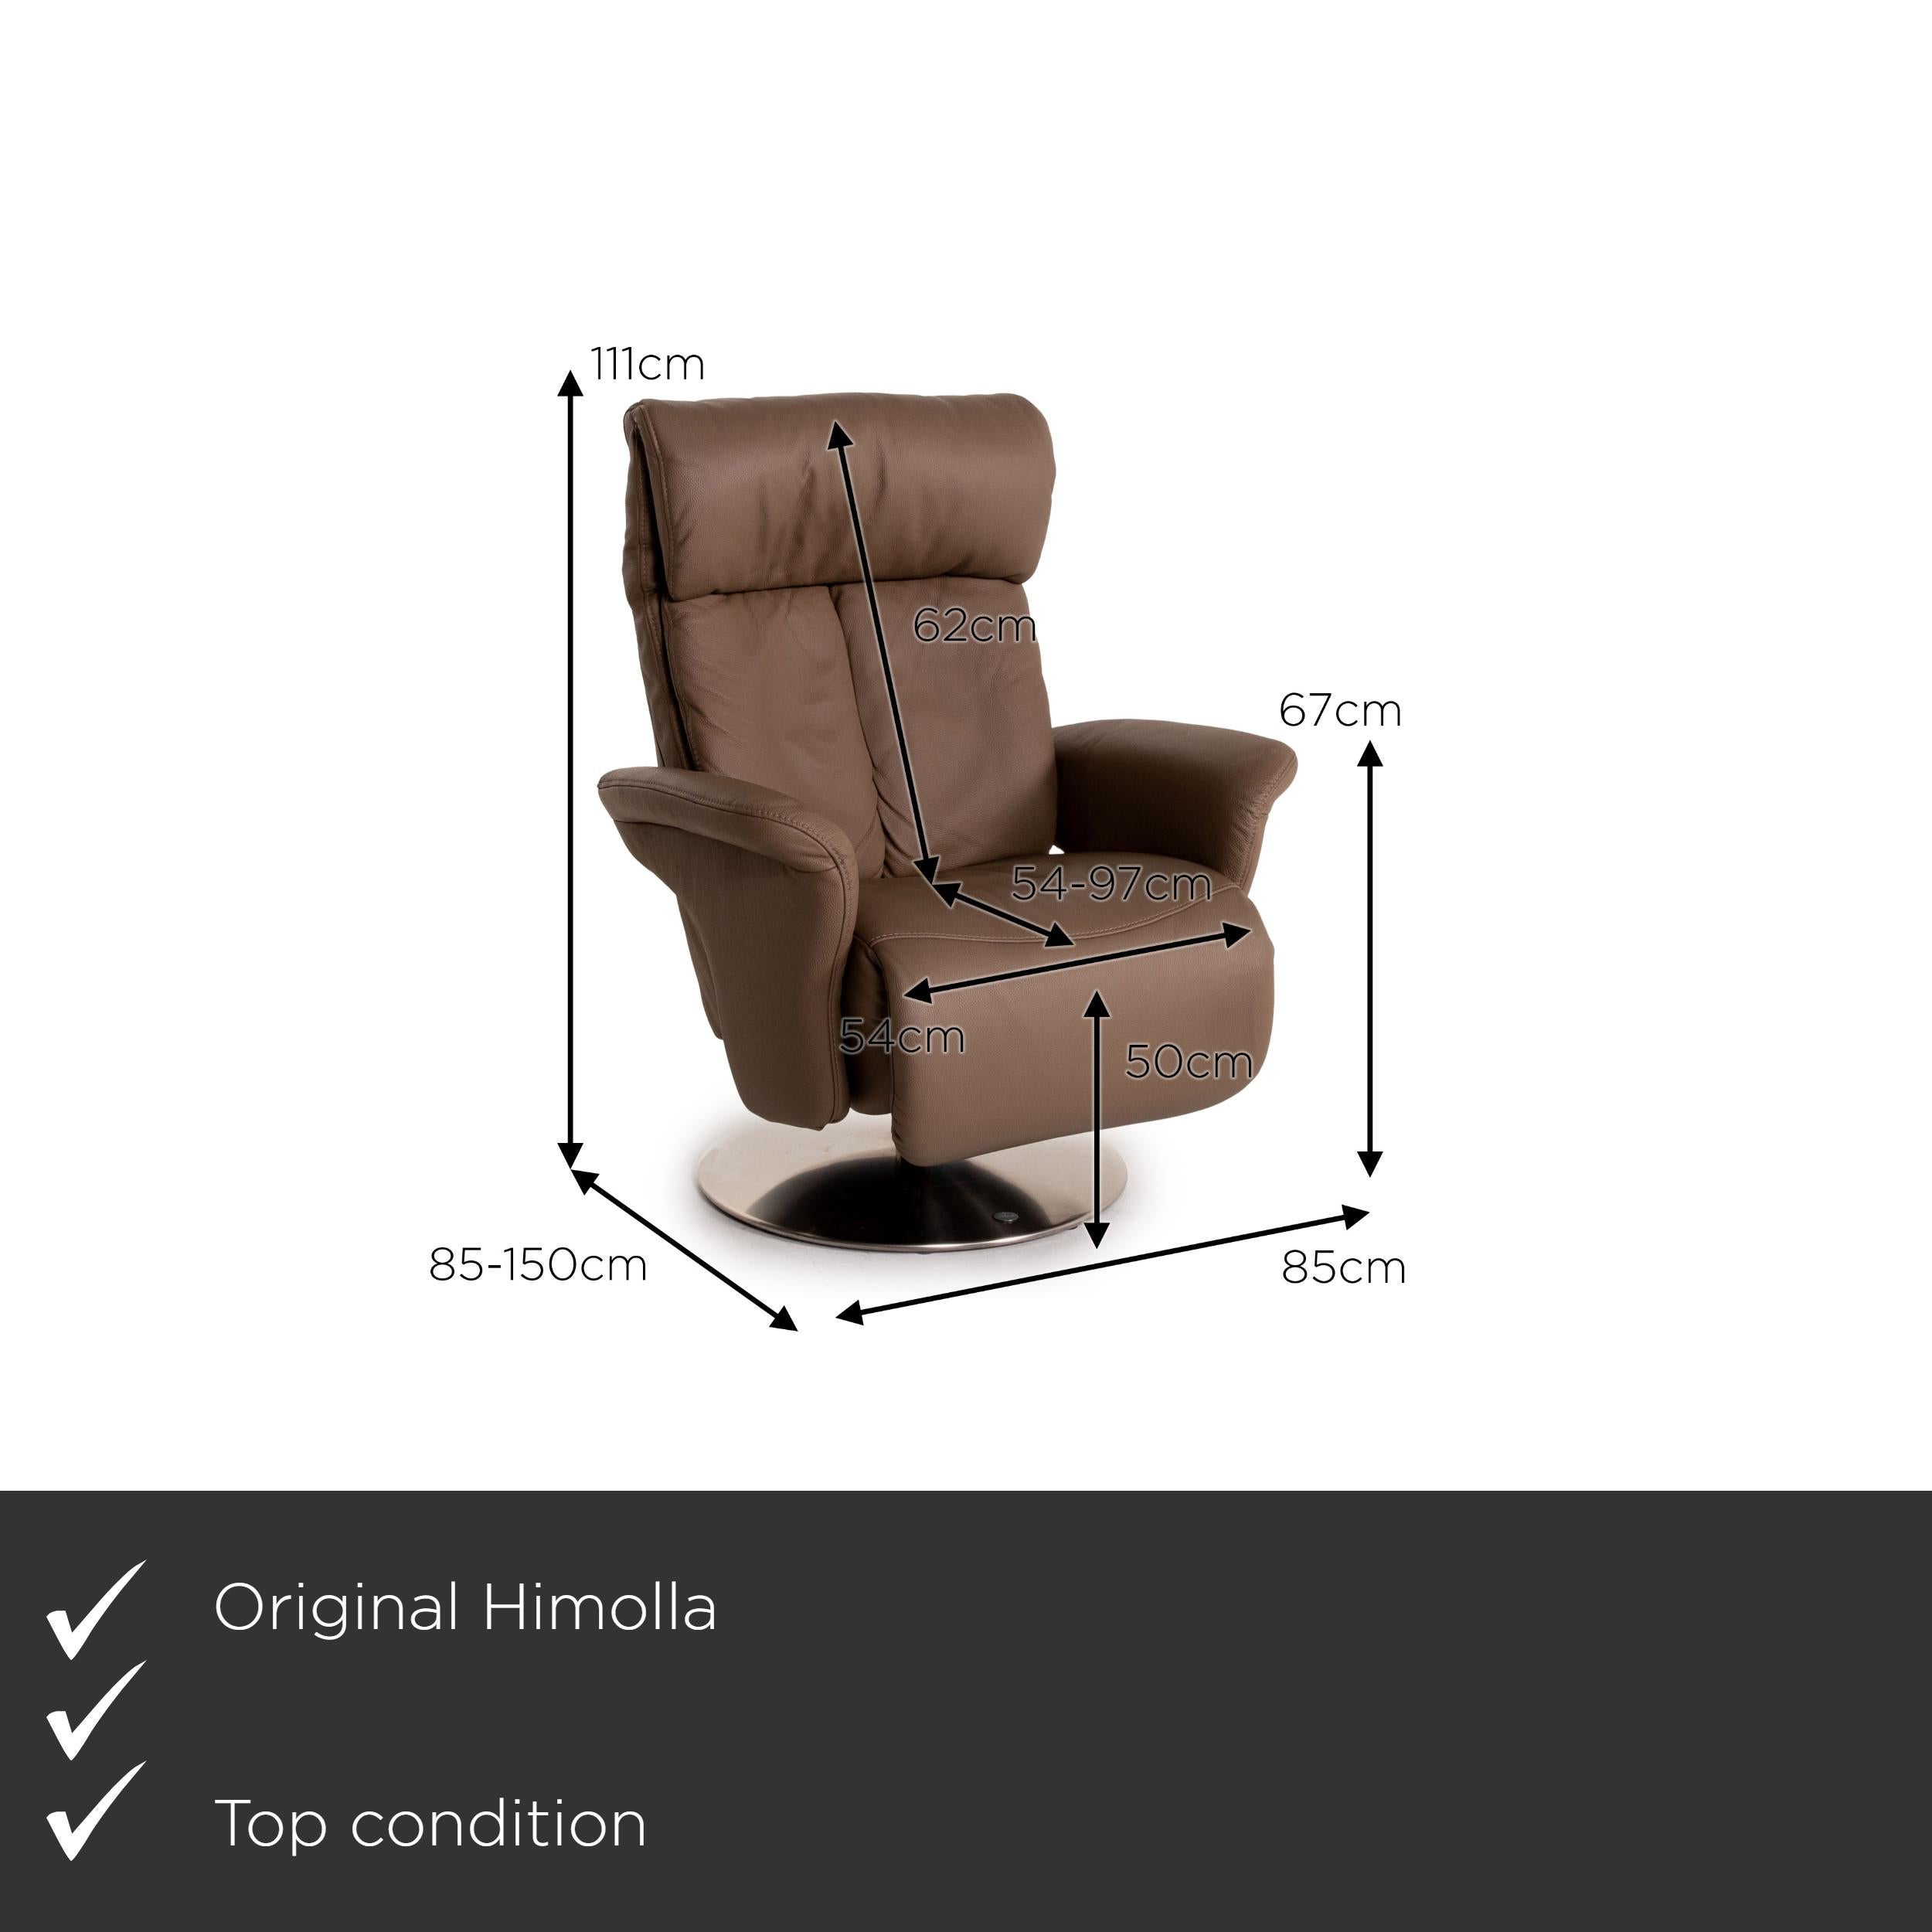 We present to you a Himolla 7227 leather armchair brown relaxation function function relaxation.

Product measurements in centimeters:

Depth 85
Width 85
Height 111
Seat height 50
Rest height 67
Seat depth 54
Seat width 54
Back height